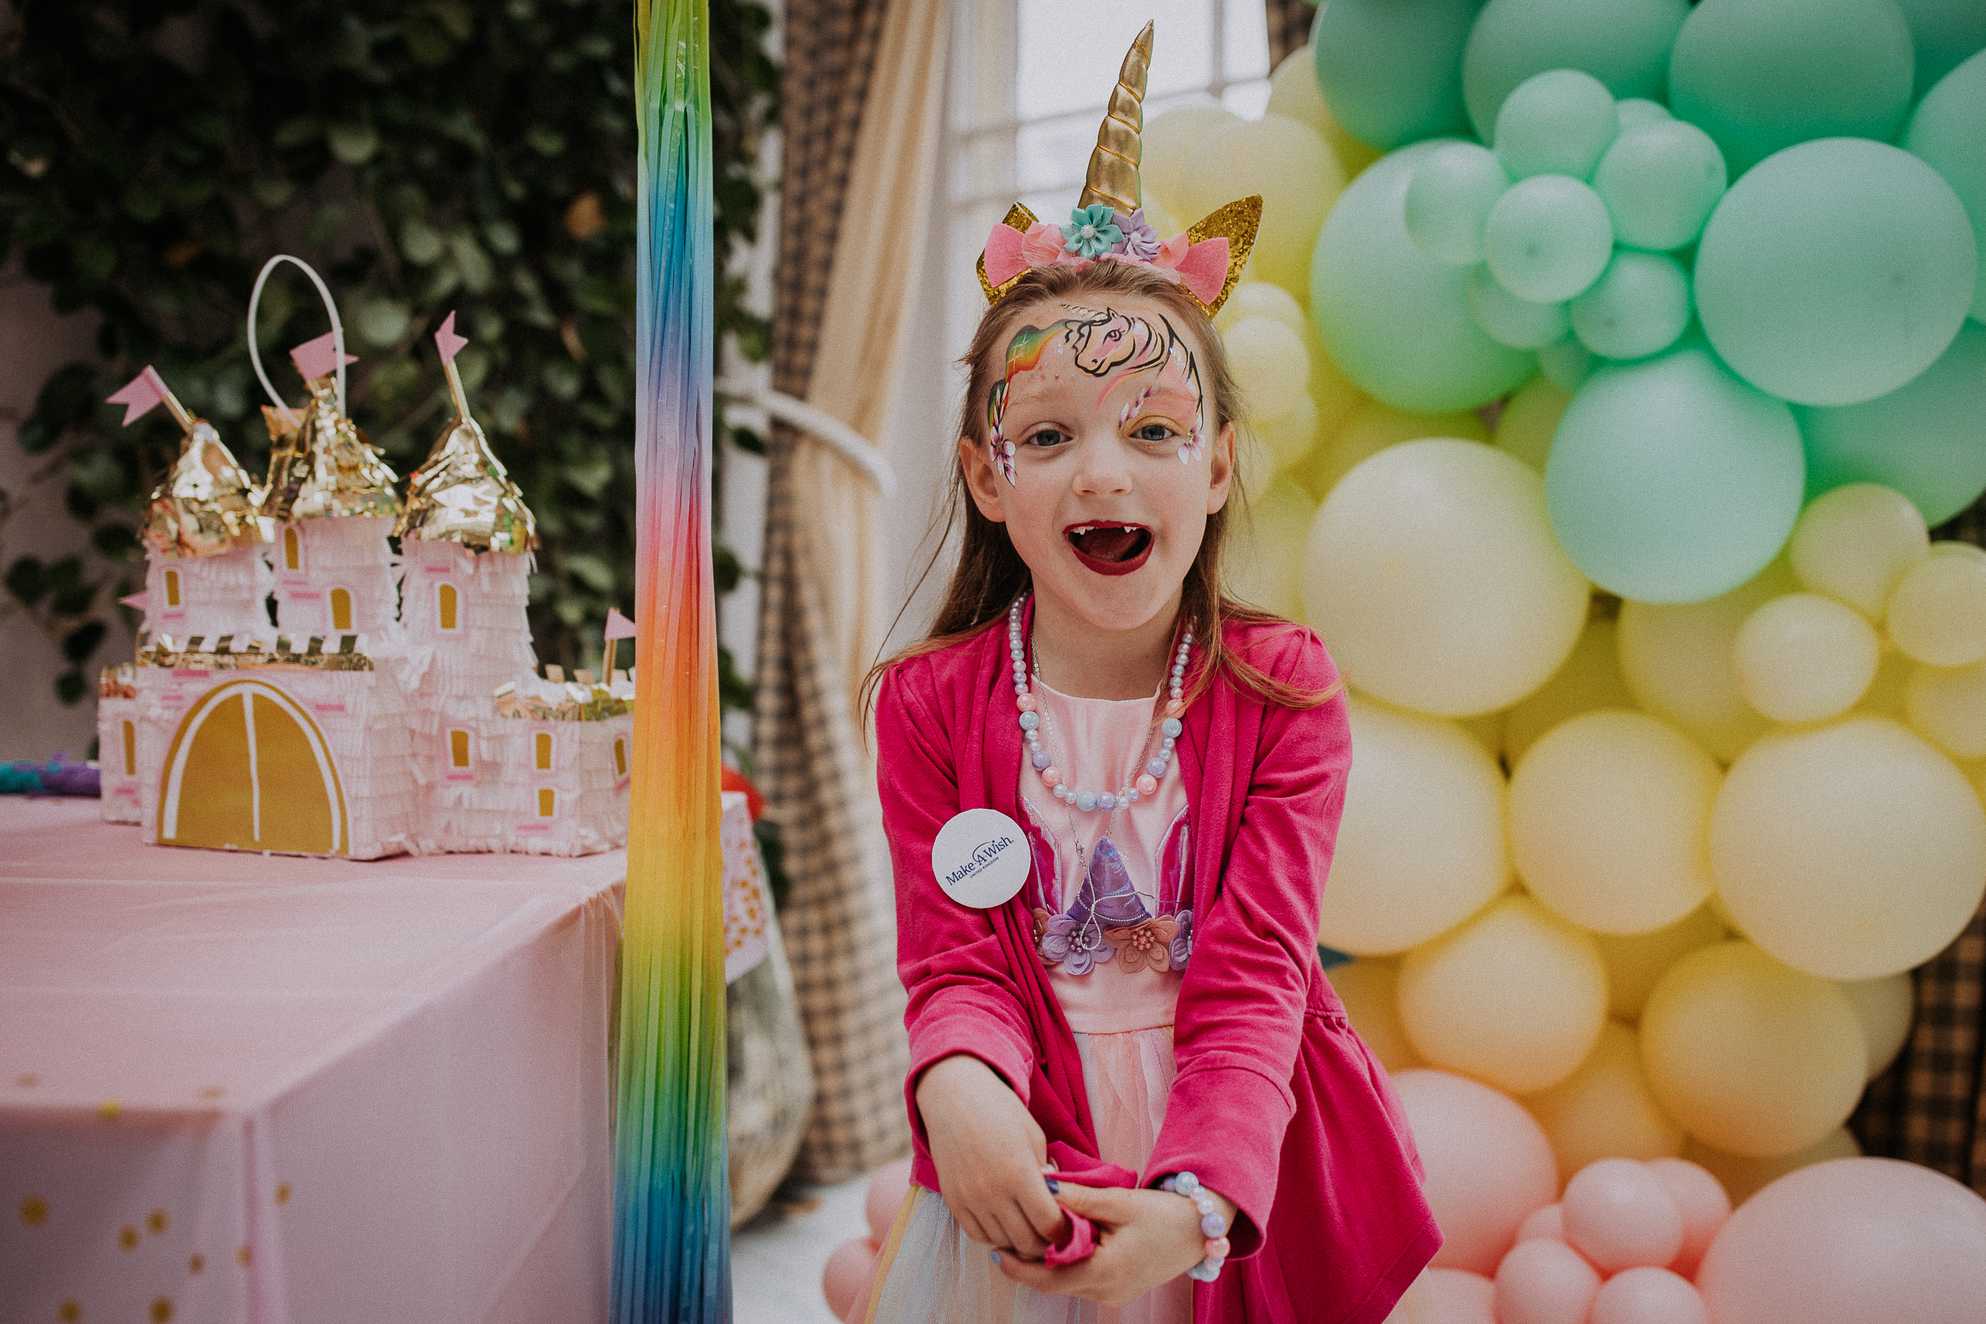 Lacey with unicorn facepaint and horn smiles at the camera with balloons alongside her